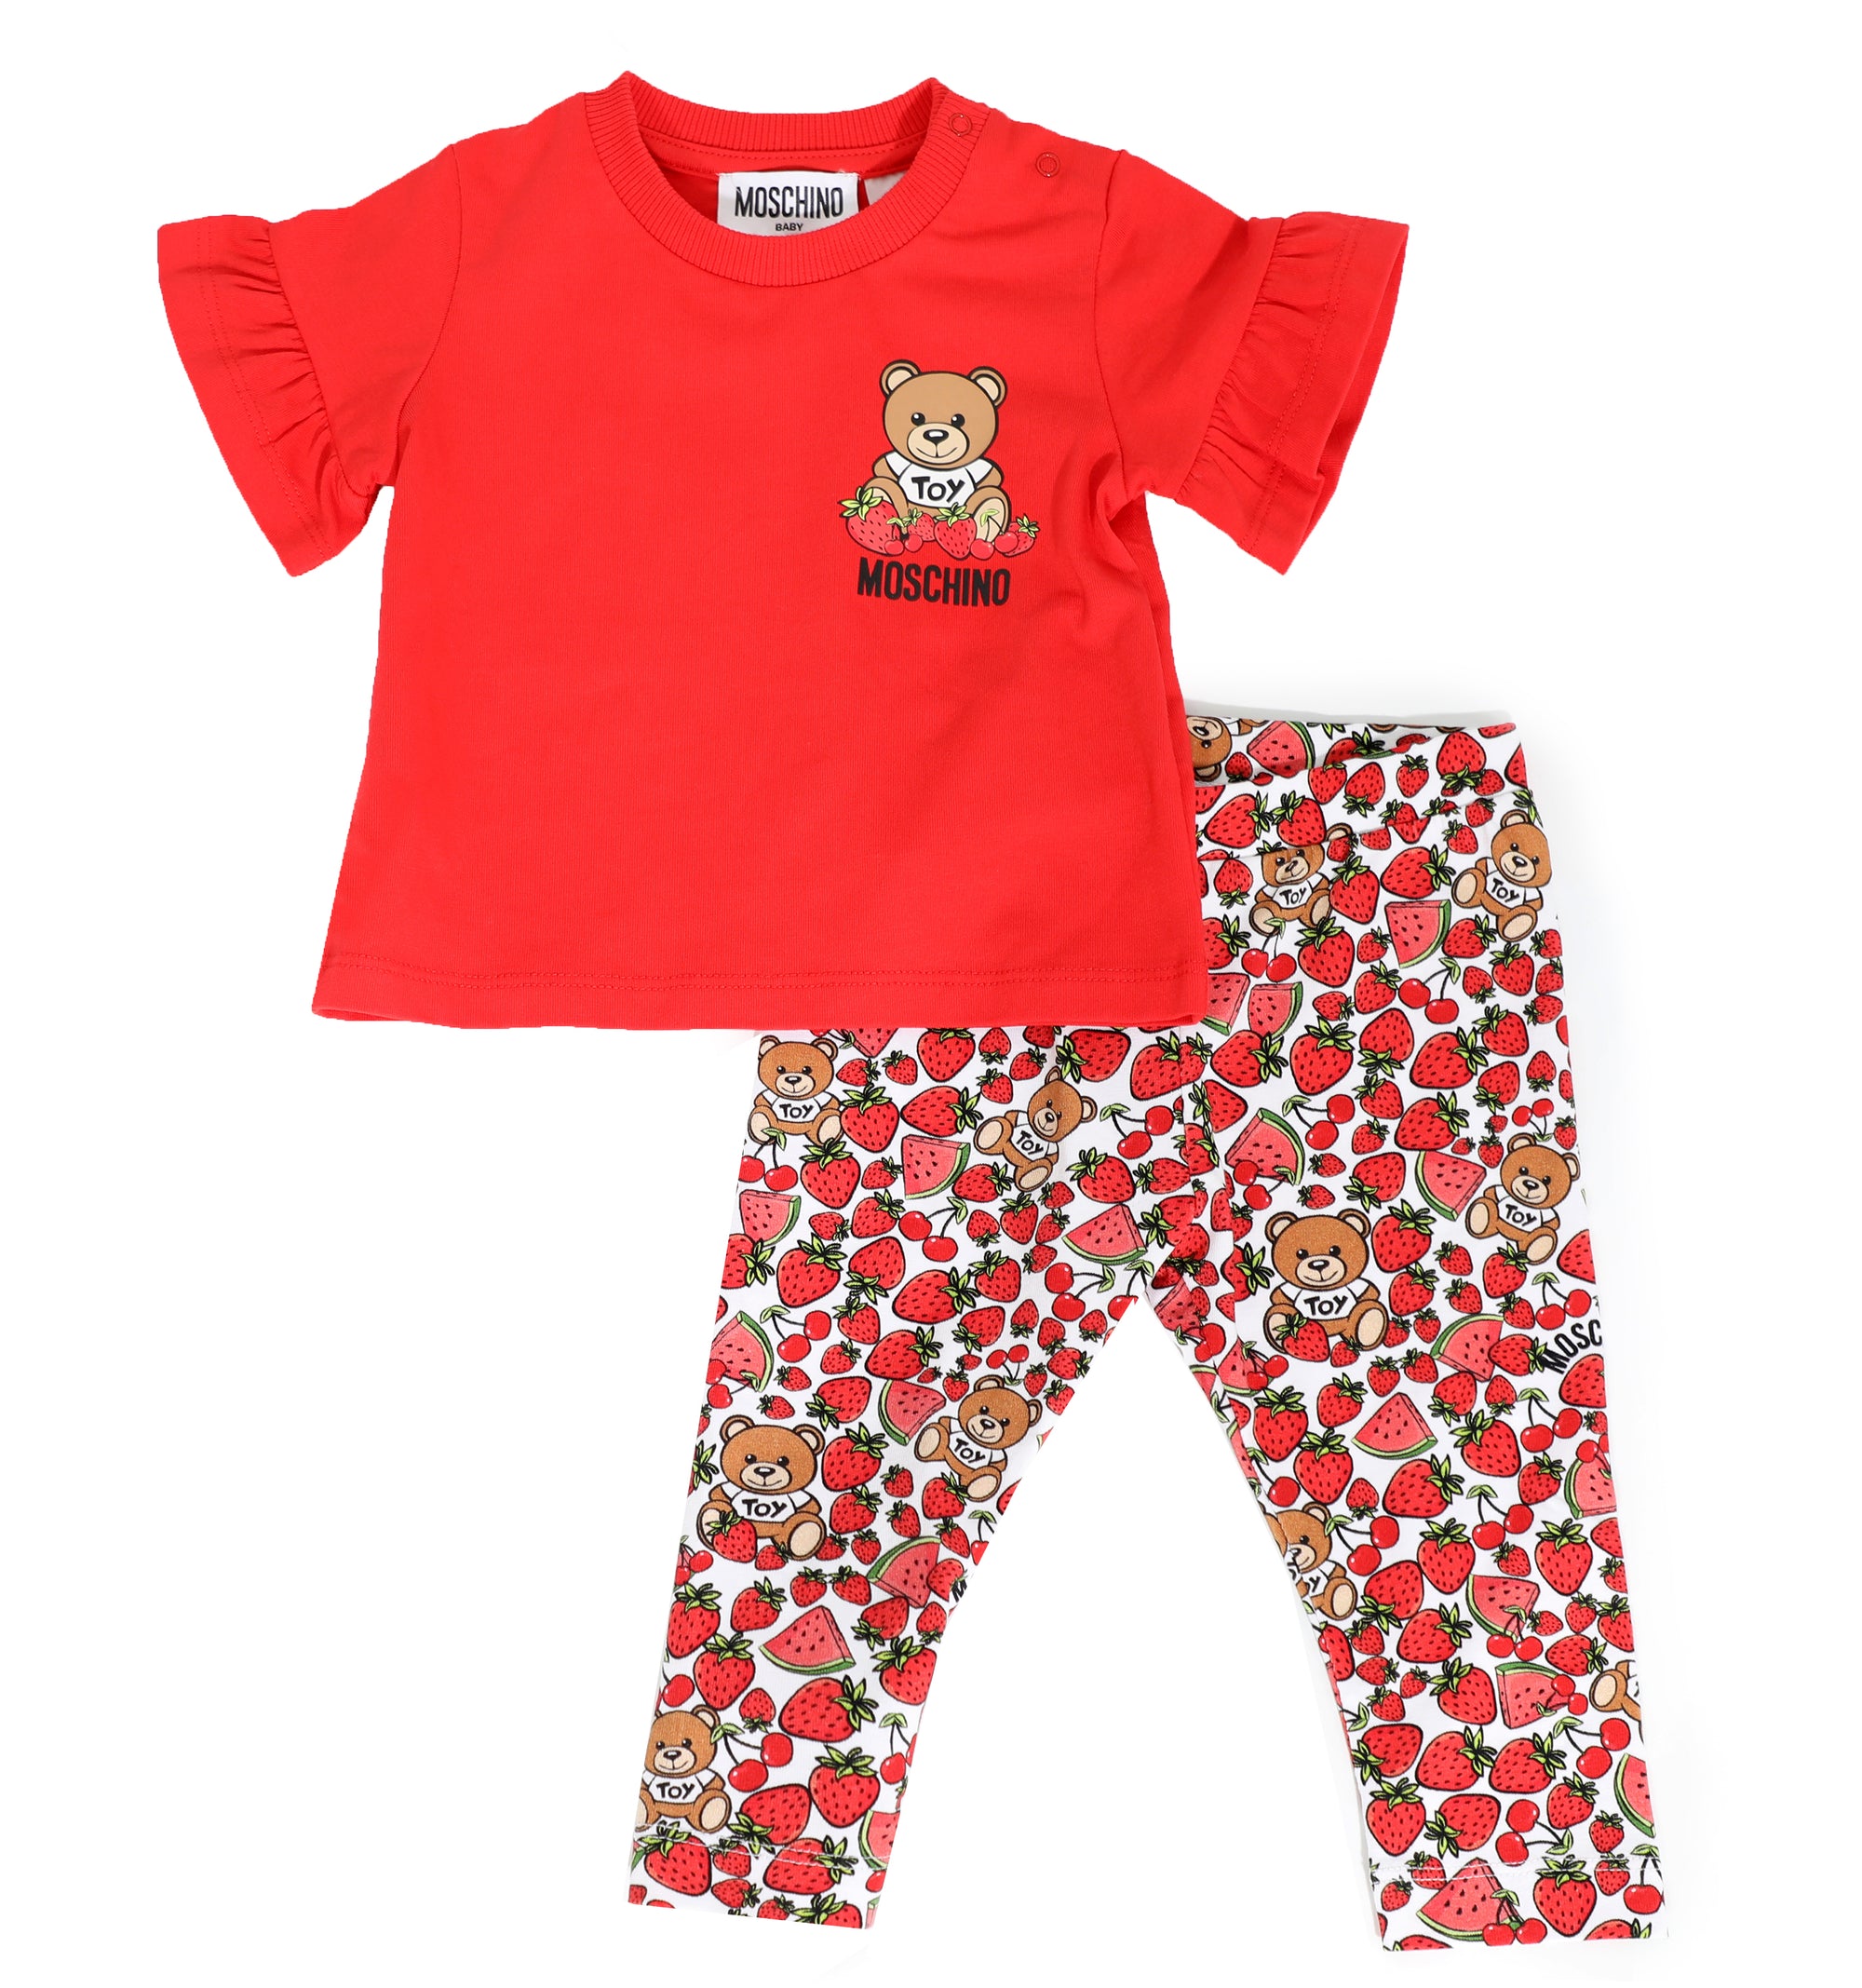 Ruffled SS Tee and Legging Set with Berries